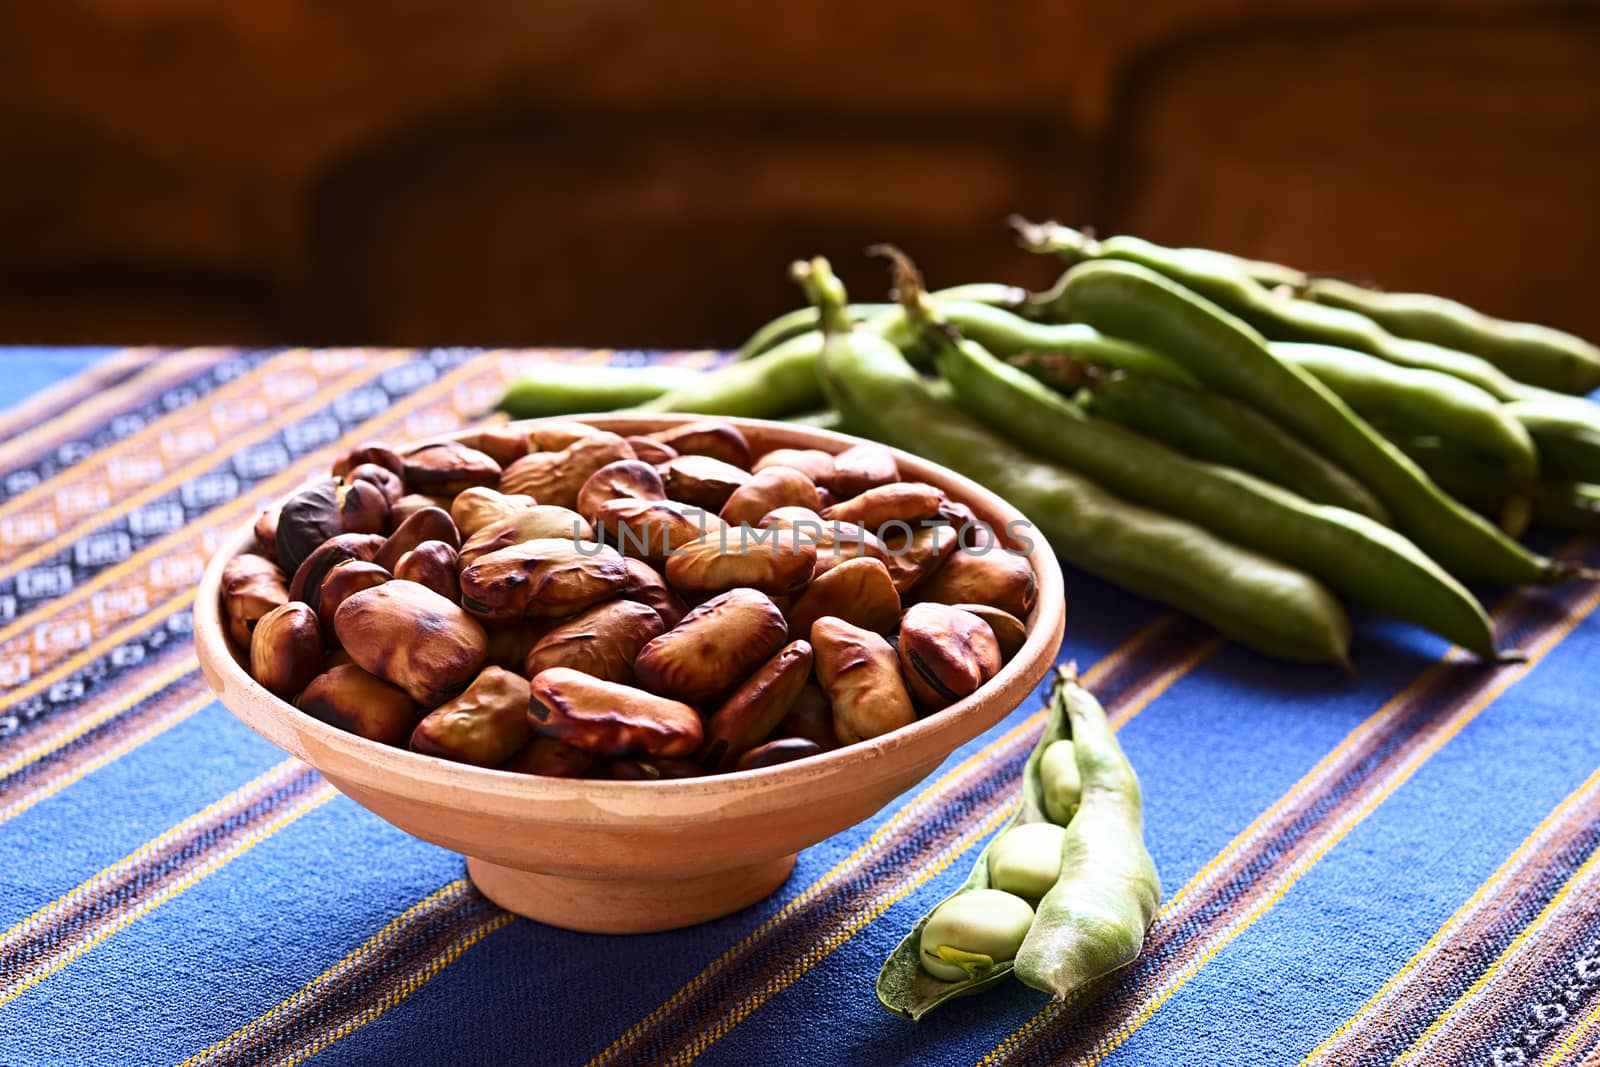 Toasted fava beans (lat. Vicia faba, South America: haba) eaten as snack in Bolivia, served in clay bowl with fresh green fava beans on the side and in the back, photographed with natural light (Selective Focus, Focus one third into the toasted beans)